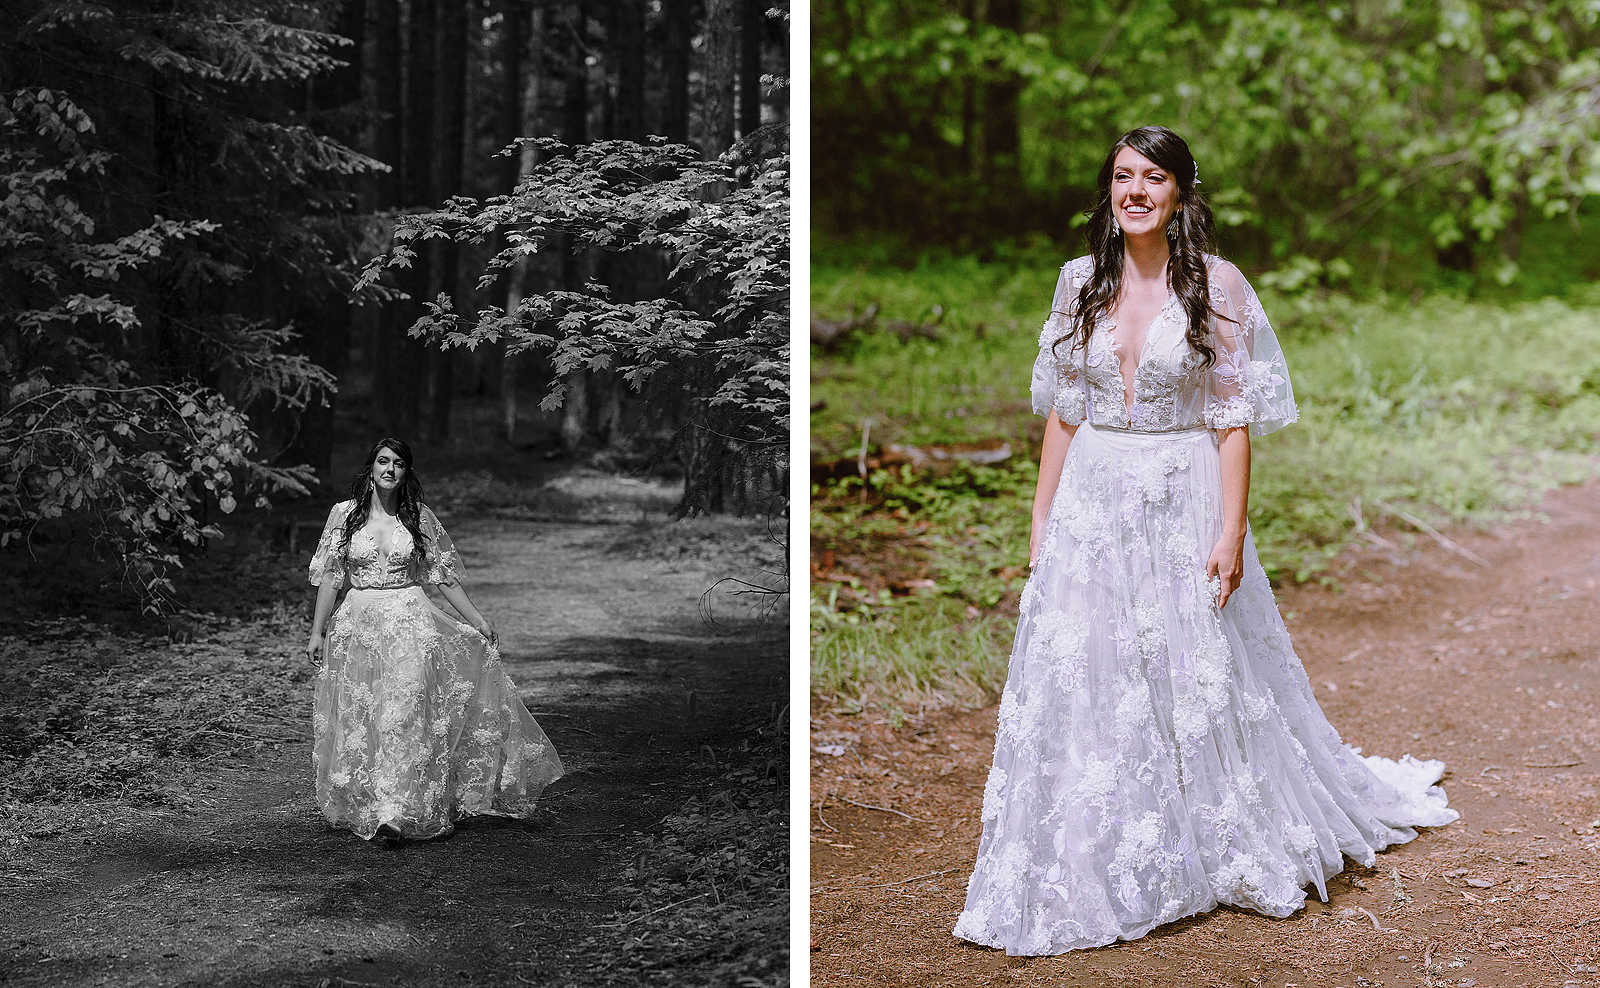 Bride walking to meet her Groom in the forest - Trout Lake Wedding, WA